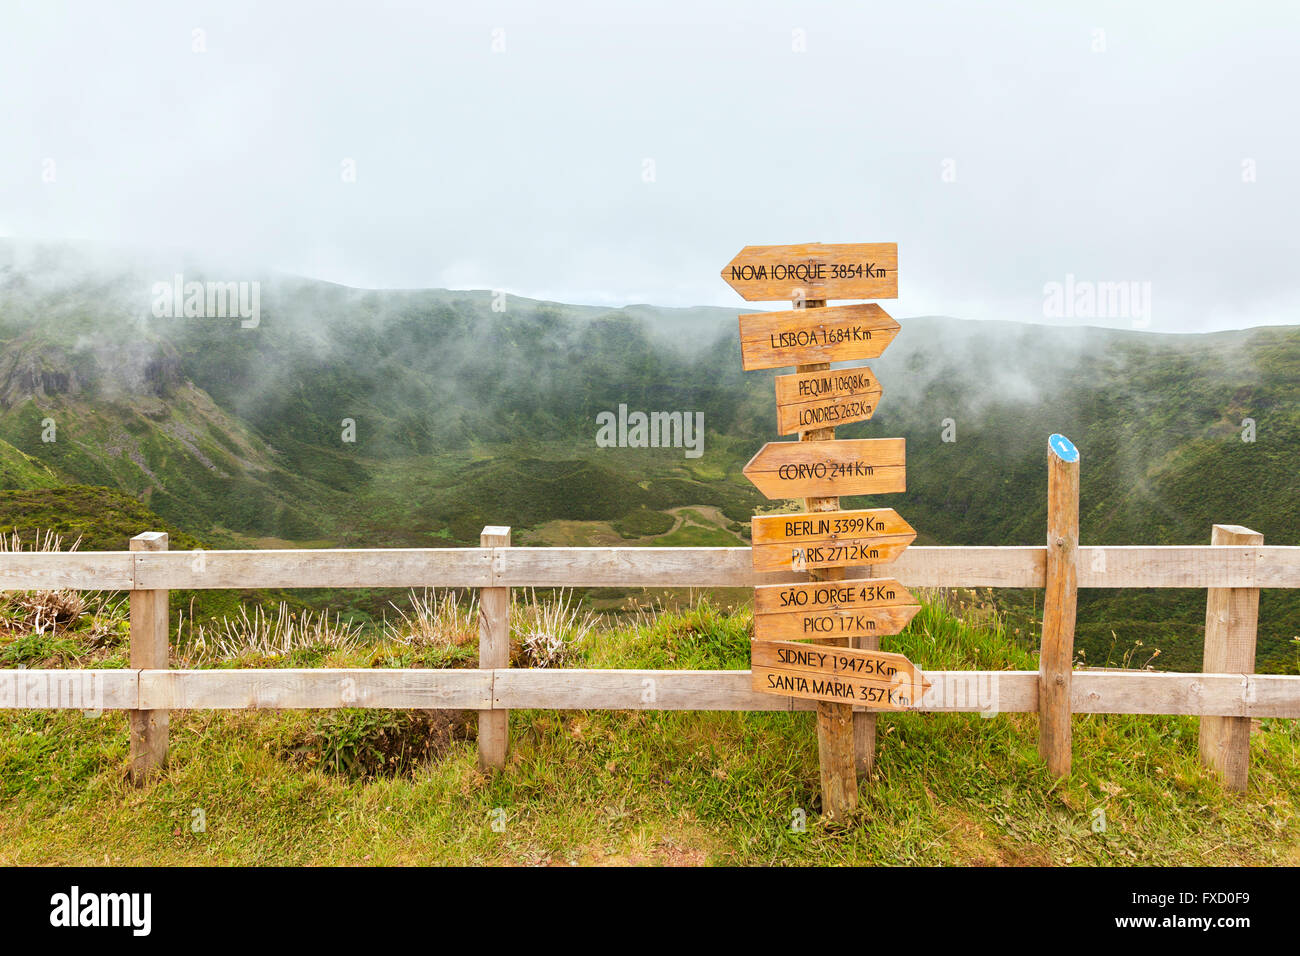 Directional sign showing distances to worldwide locations at Cabeço Gordo, Faial island, Azores, Caldera in background Stock Photo